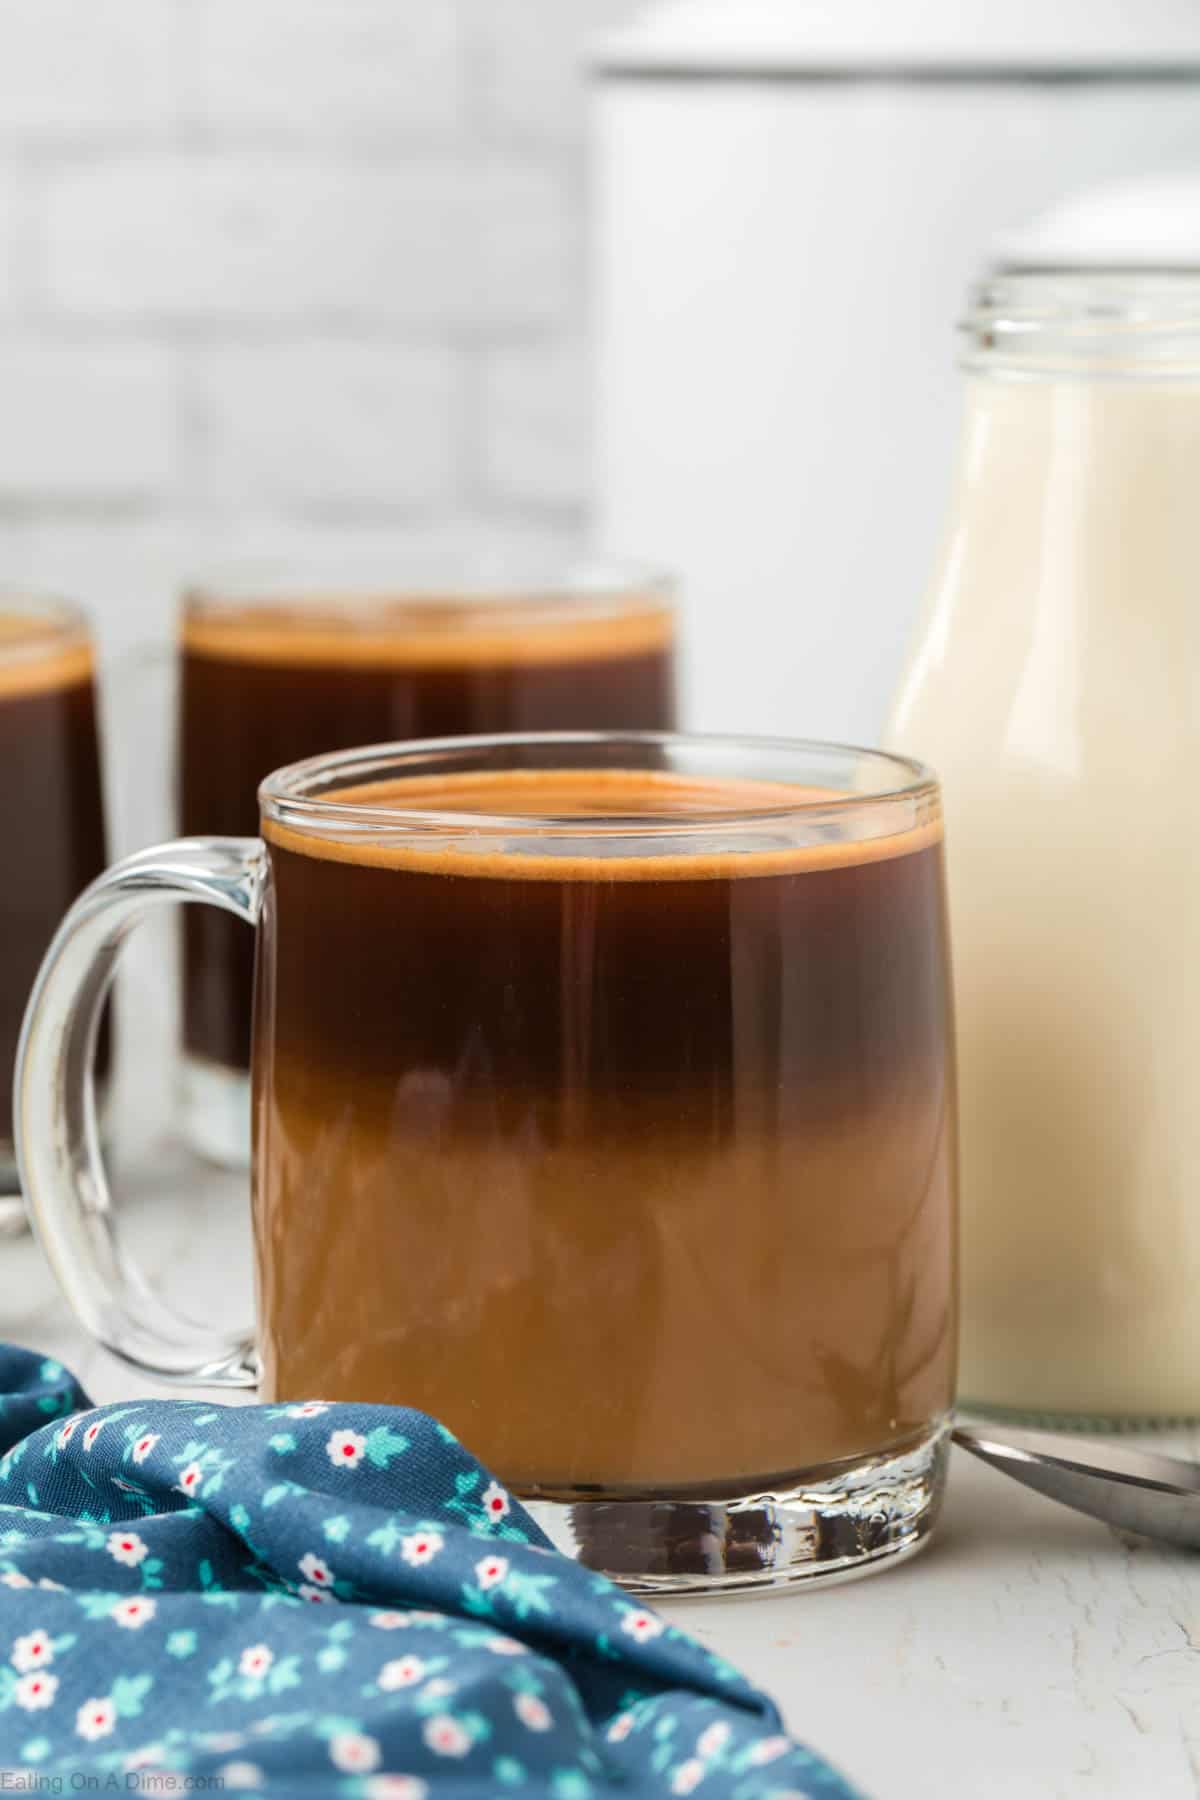 A clear glass mug is filled with layered iced coffee, showcasing dark coffee on top and light cream at the bottom. Another mug of layered coffee and a glass bottle of homemade coffee creamer are in the background. A blue floral cloth is partially draped beside the mug.